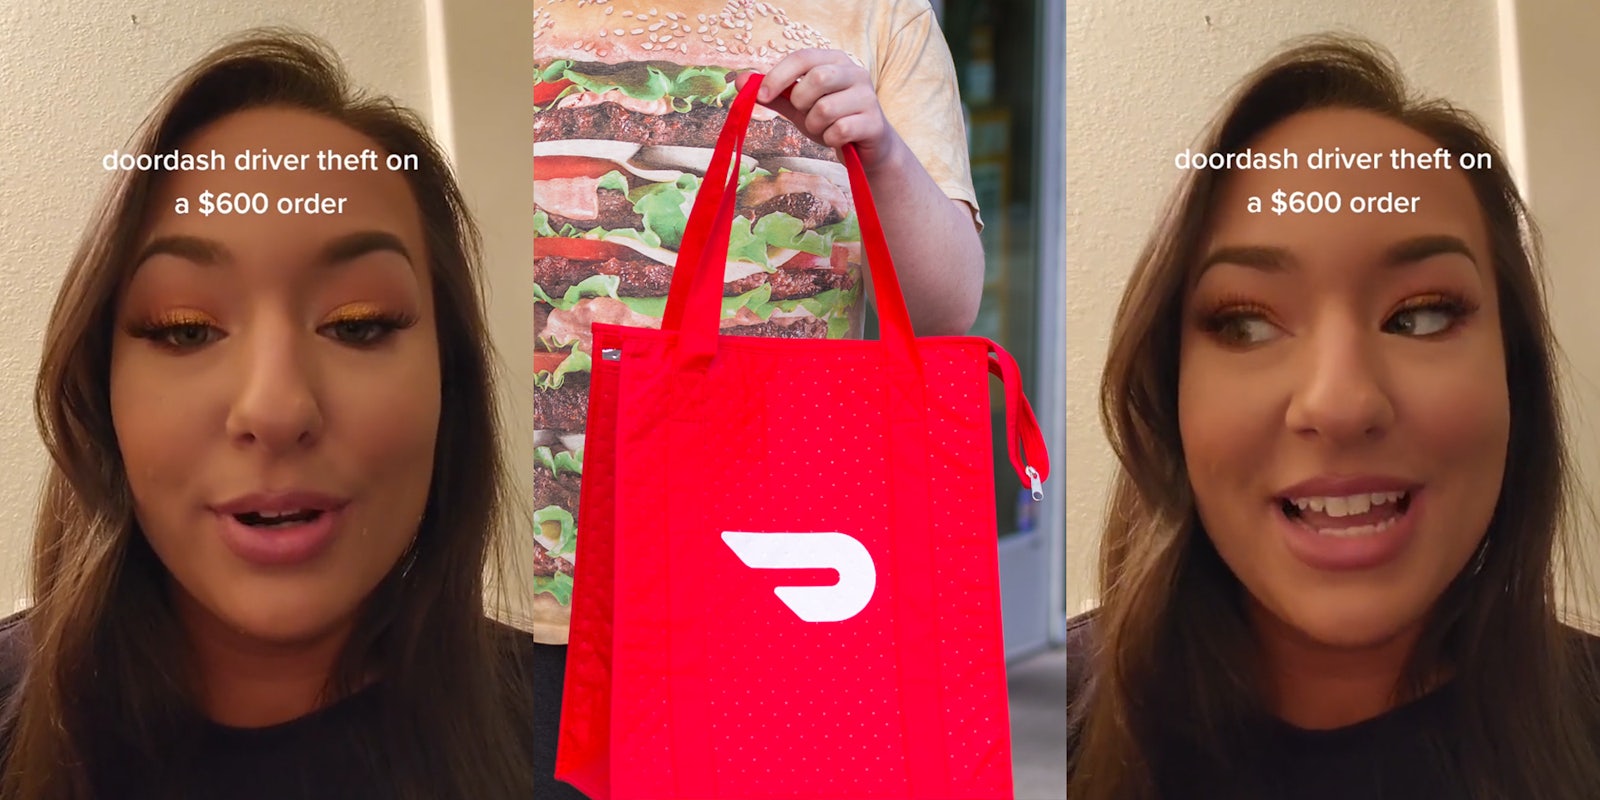 worker speaking in front of tan wall with caption 'doordash driver theft on a $600 order' (l) DoorDash driver holding branded bag outside (c) worker speaking in front of tan wall with caption 'doordash driver theft on a $600 order' (r)